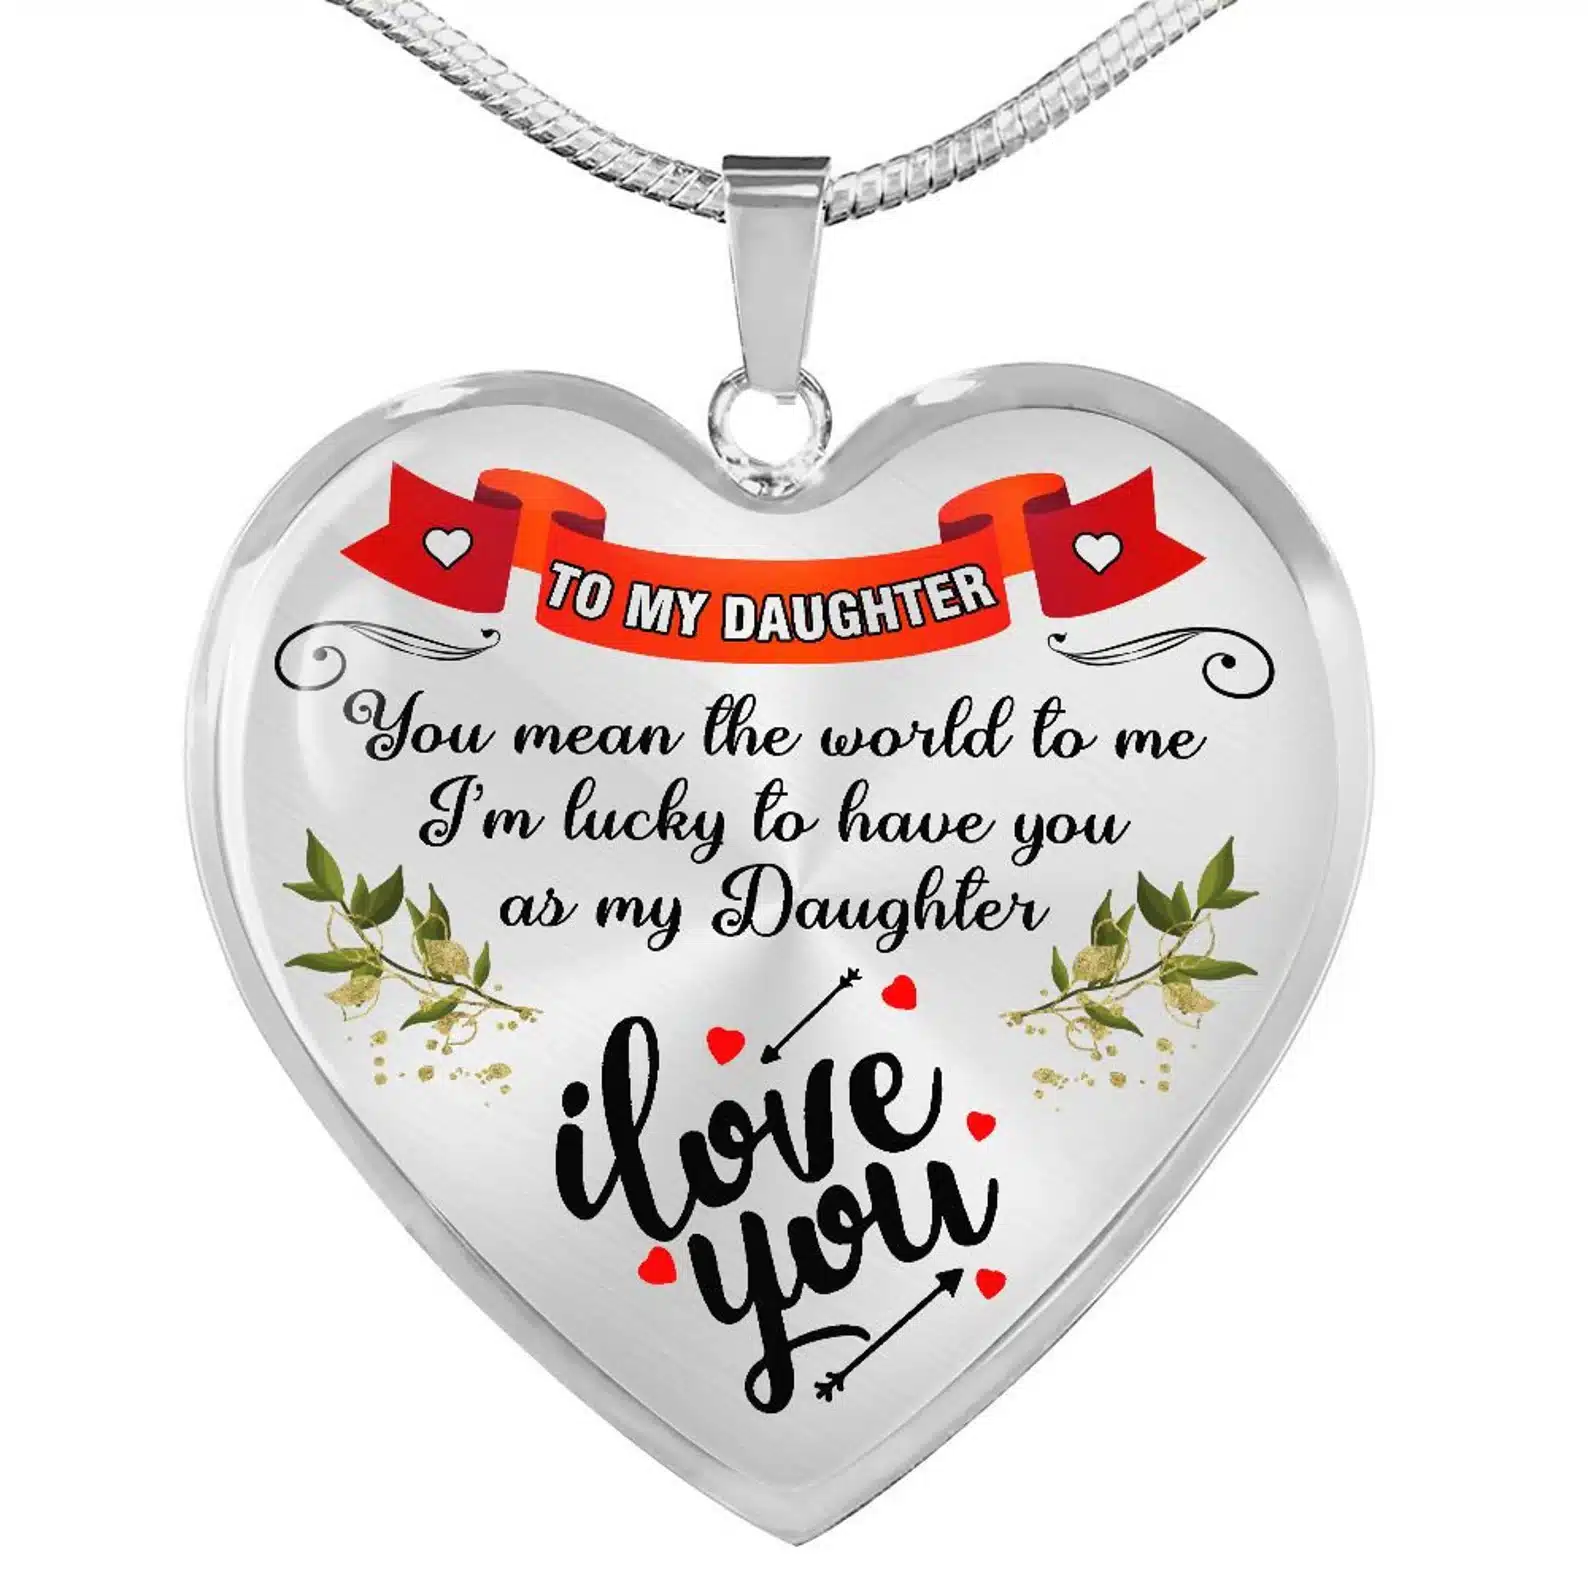 To My Daughter Necklace Gift for Daughter